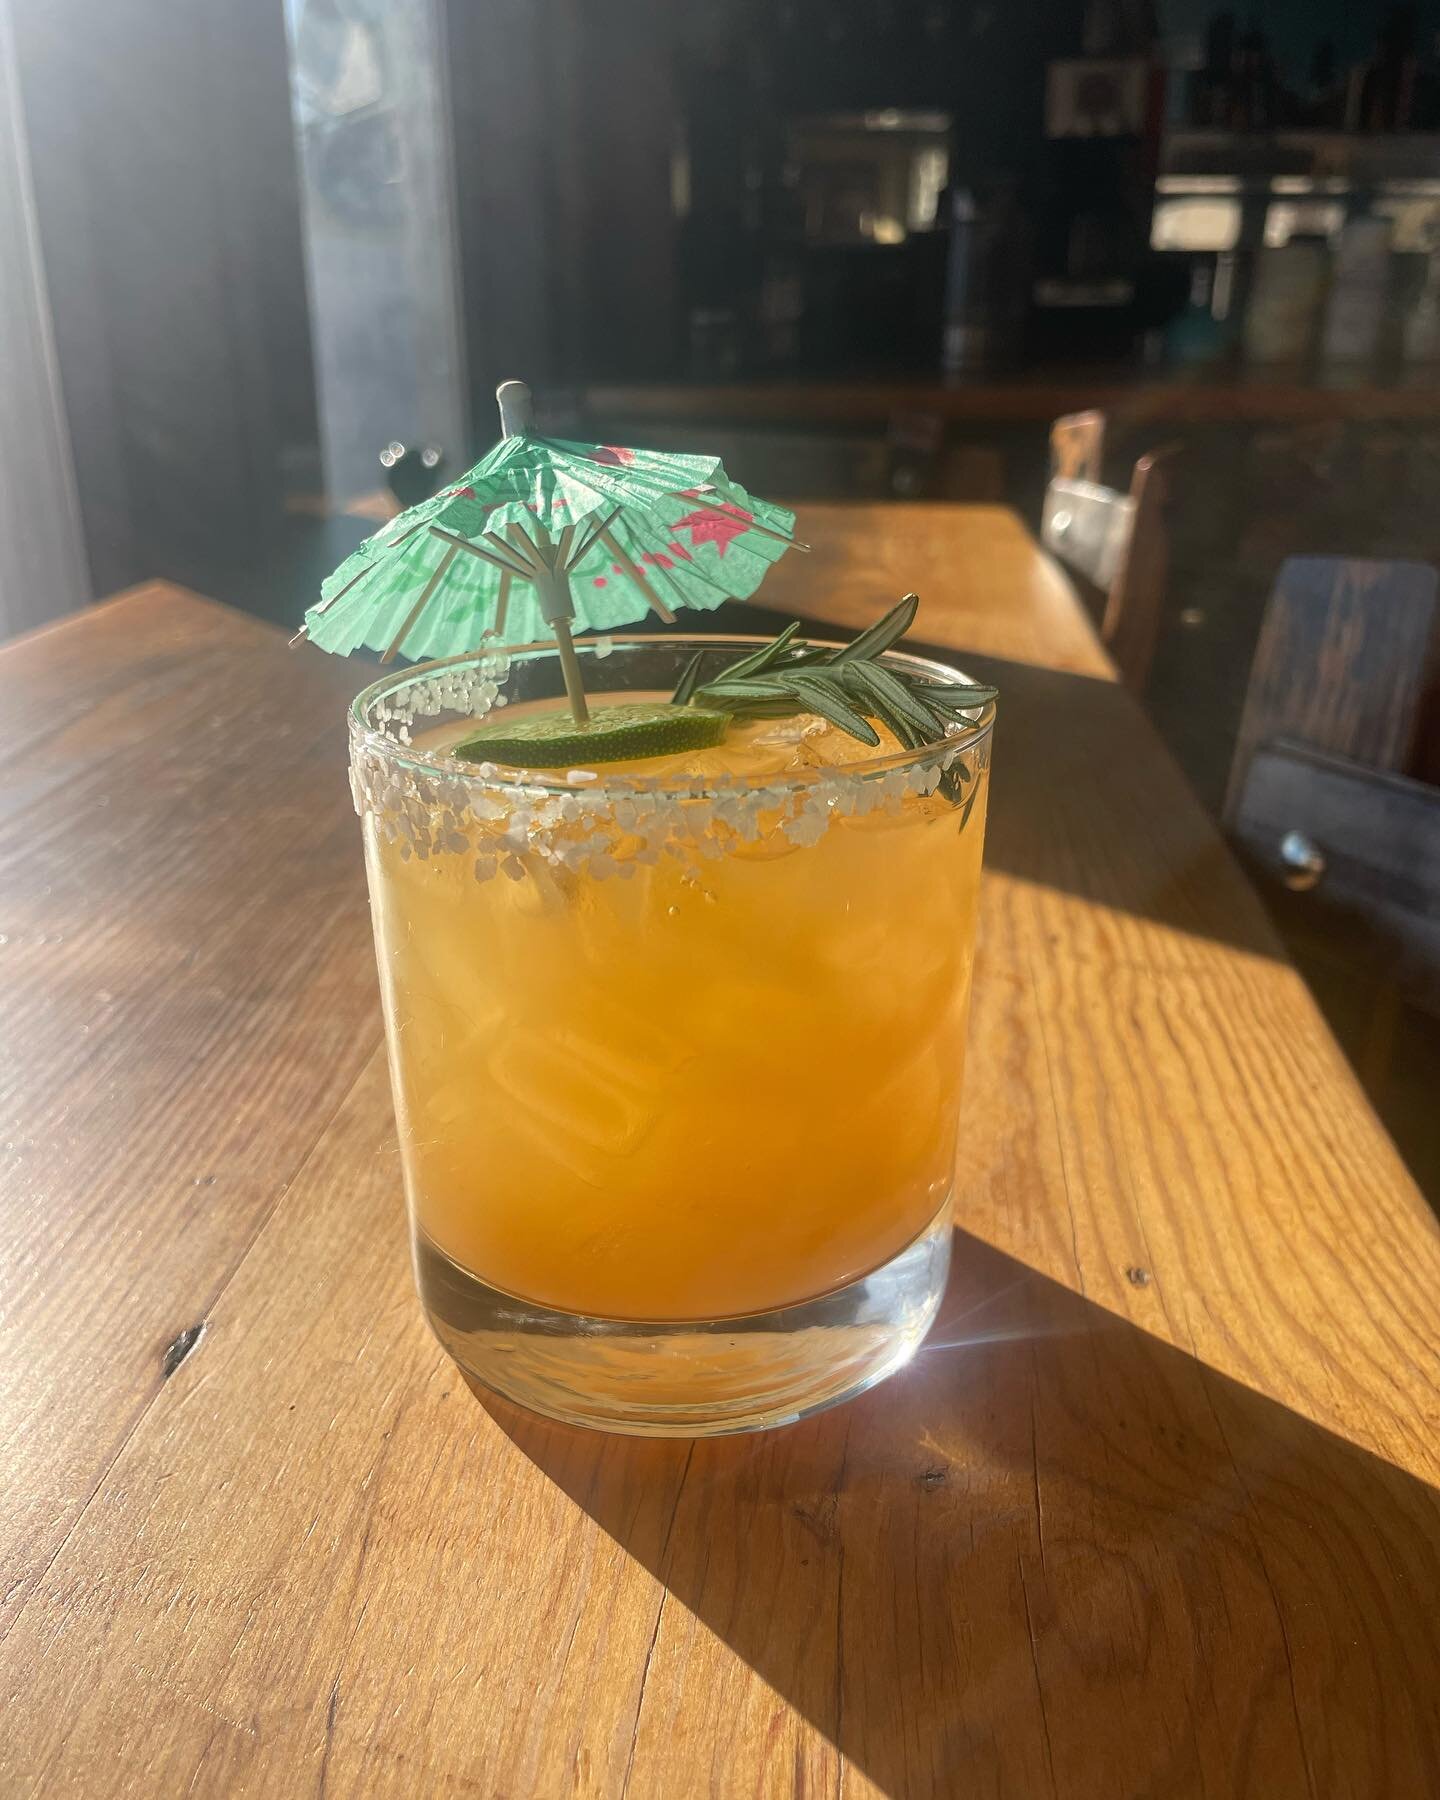 We&rsquo;ve been taking a little break&hellip;
In fact, one of our Seasonal Mocktails is even named &ldquo;P.T.O.&rdquo; 🌴🥂
-
While lots of folks partake in &ldquo;Dry January&rdquo;, we like to always offer our guests the option to go alcohol-free